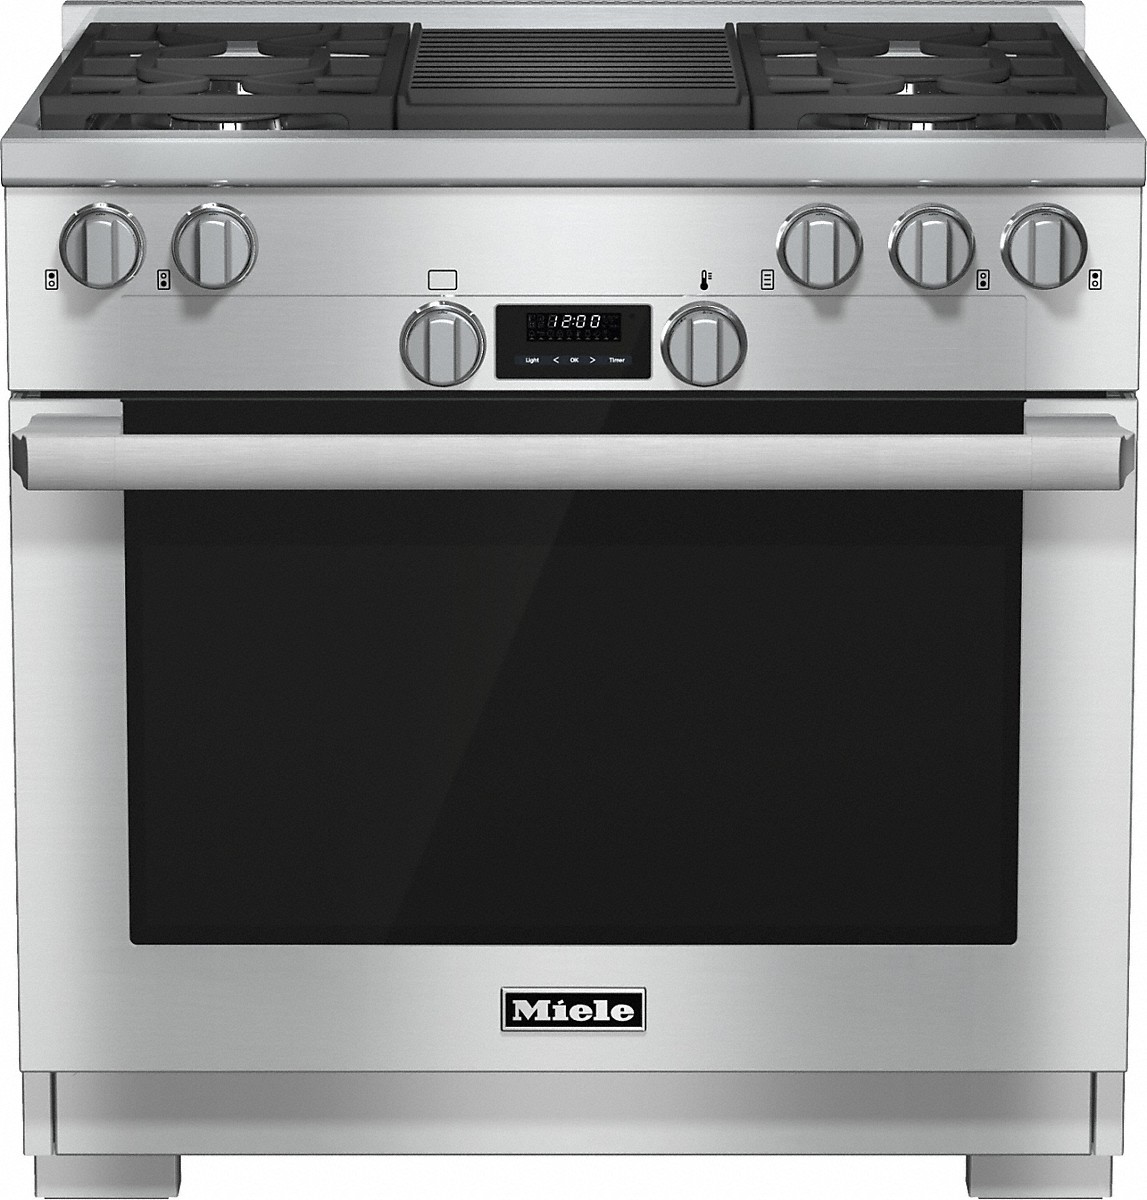 Miele - 5.8 cu. ft  Gas Range in Stainless - HR 1135-1 G